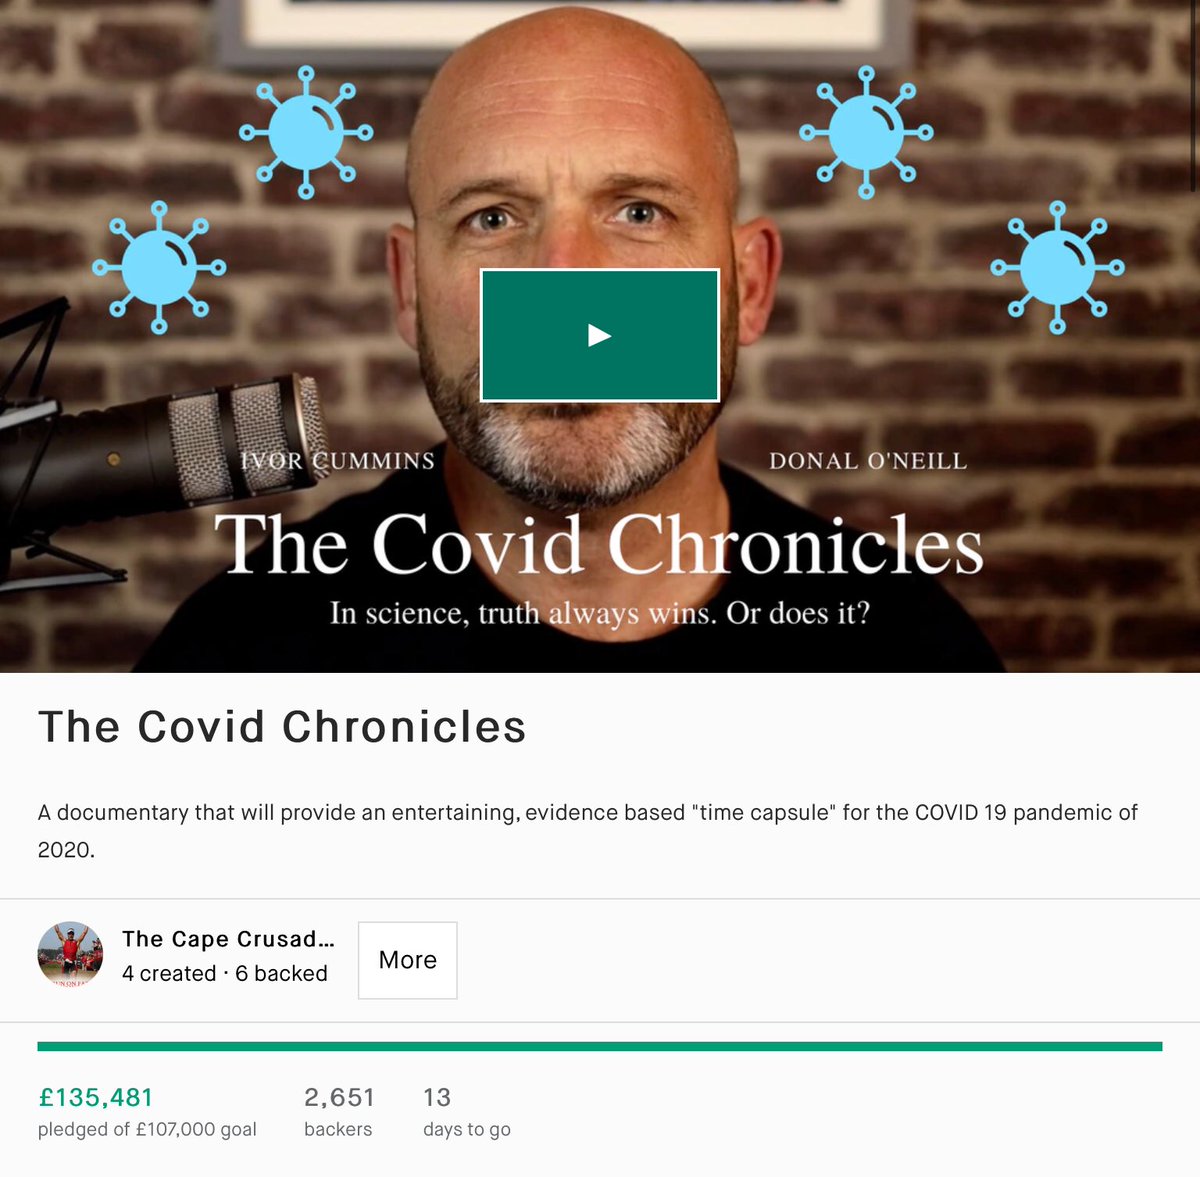 Ivor is currently relieving his fans of spare change to make a documentary that ‘will chart Ivor's personal journey and the "great pandemic" of 2020 from a perspective few can ignore’.  https://www.kickstarter.com/projects/capecrusaders/the-covid-chronicles 3/